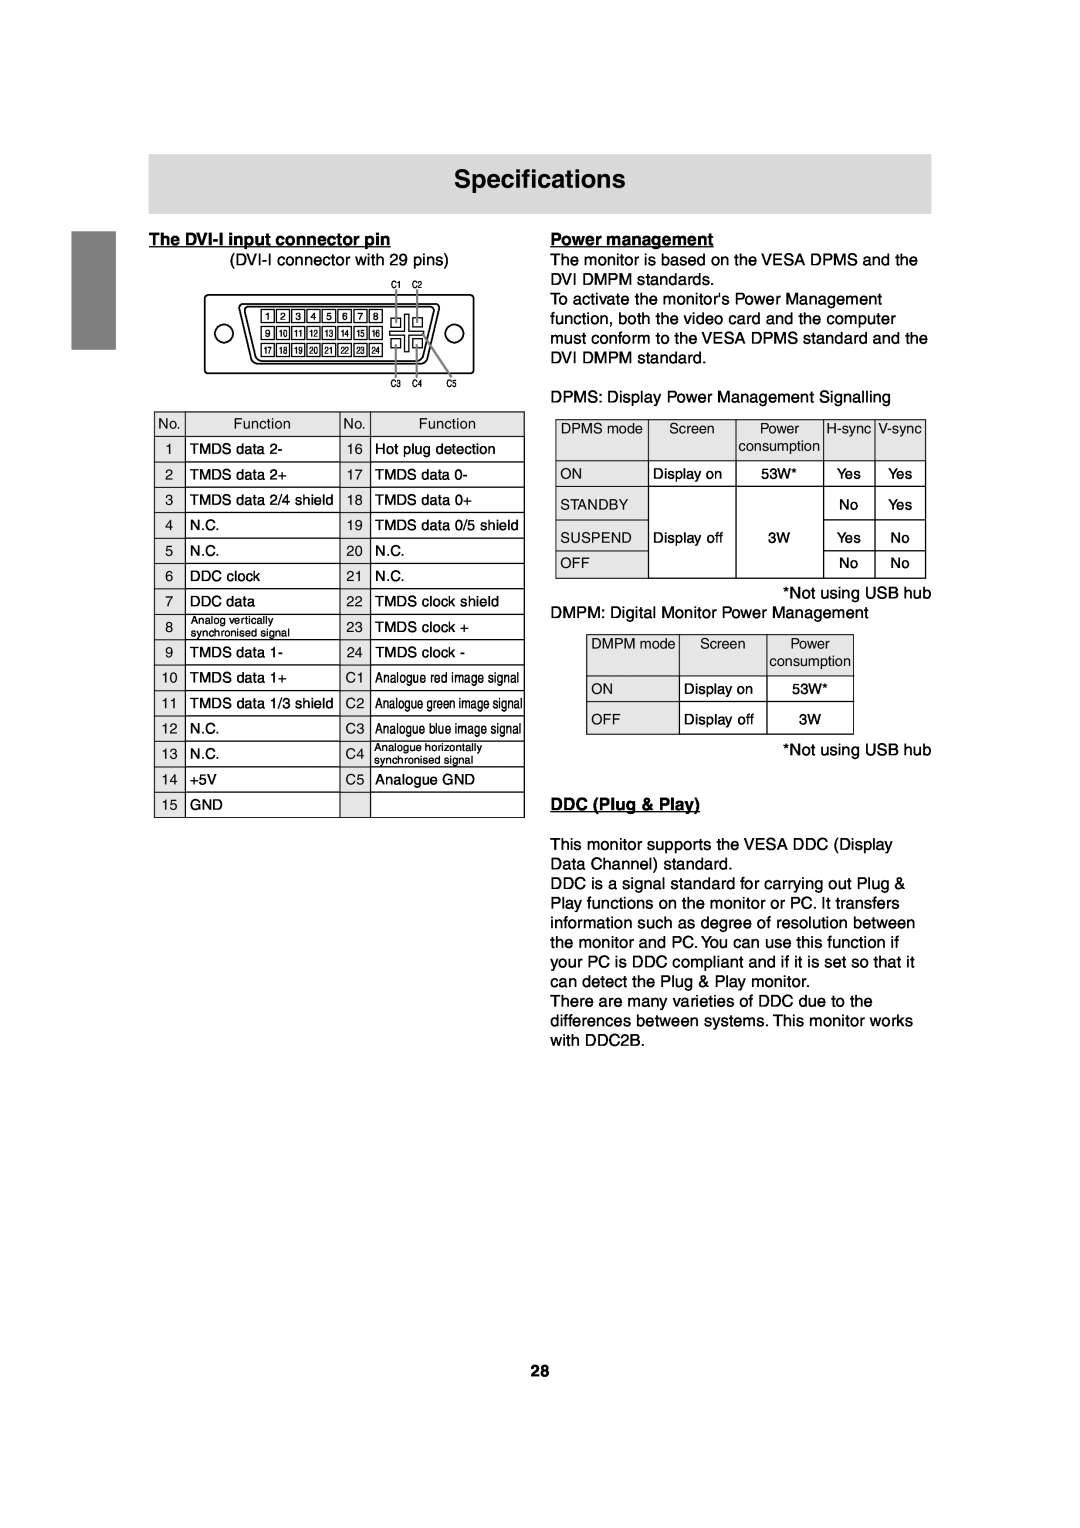 Sharp LL-T2020 operation manual The DVI-I input connector pin, Power management, DDC Plug & Play, Specifications 